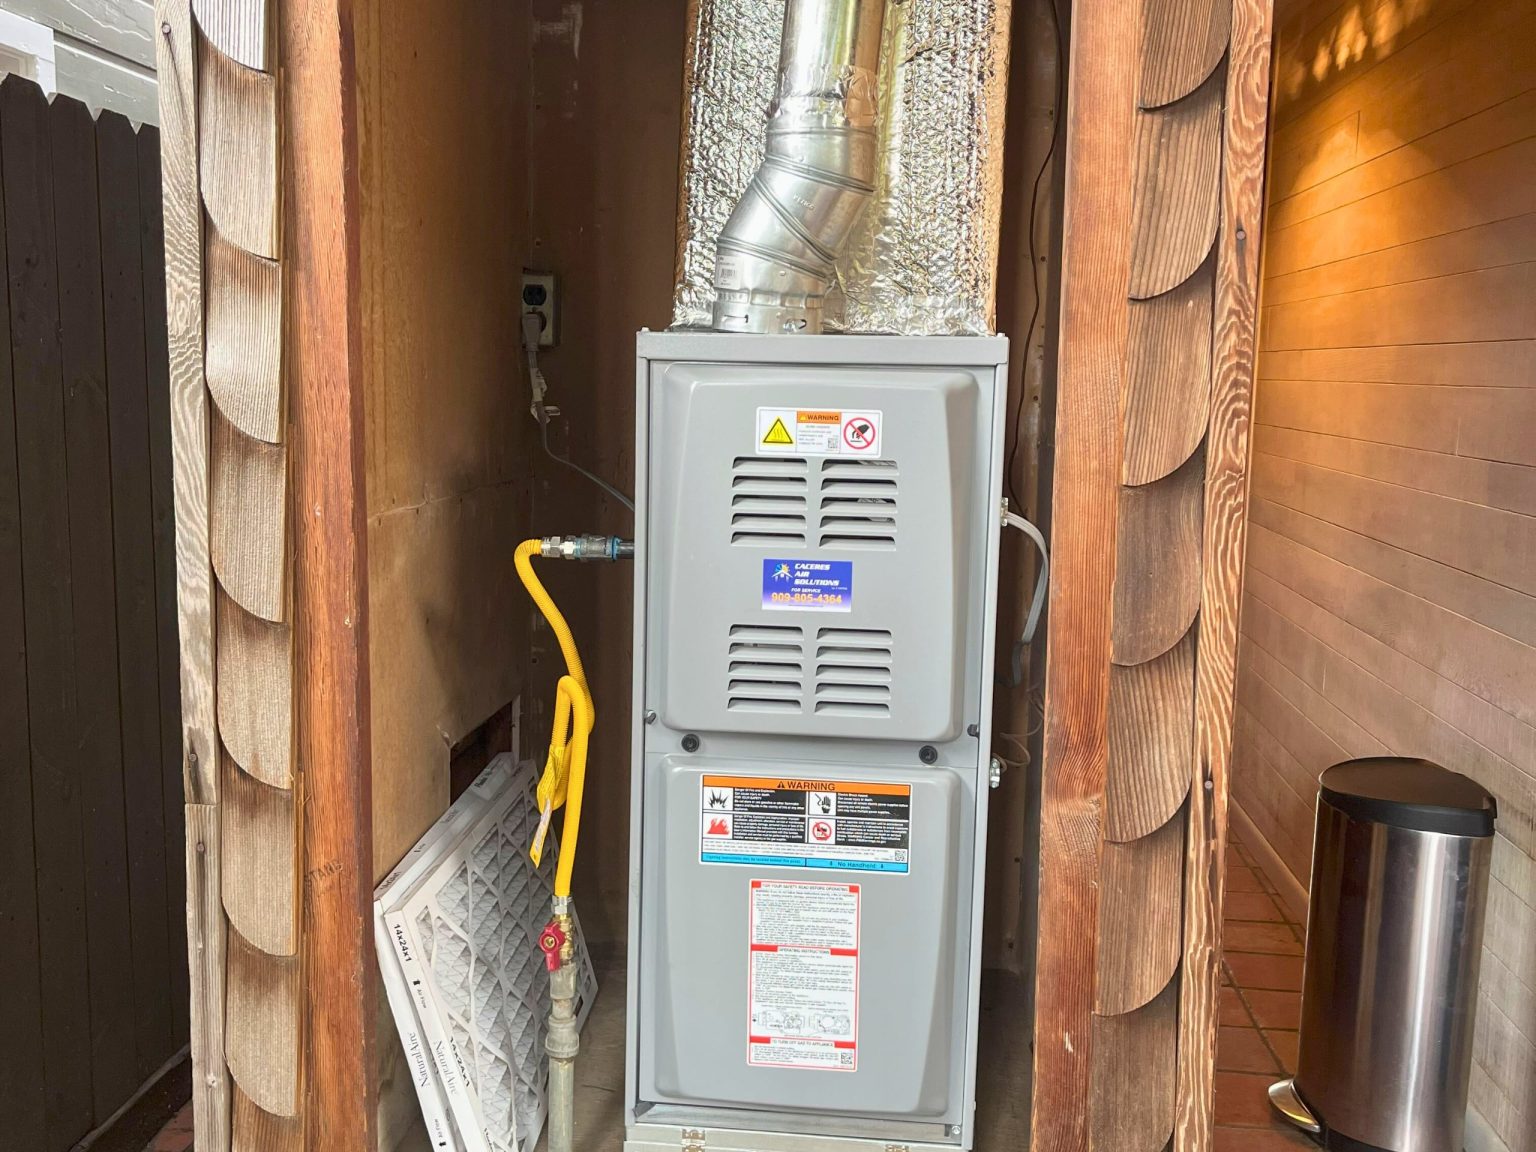 10 Silent Signs Your Furnace is Failing